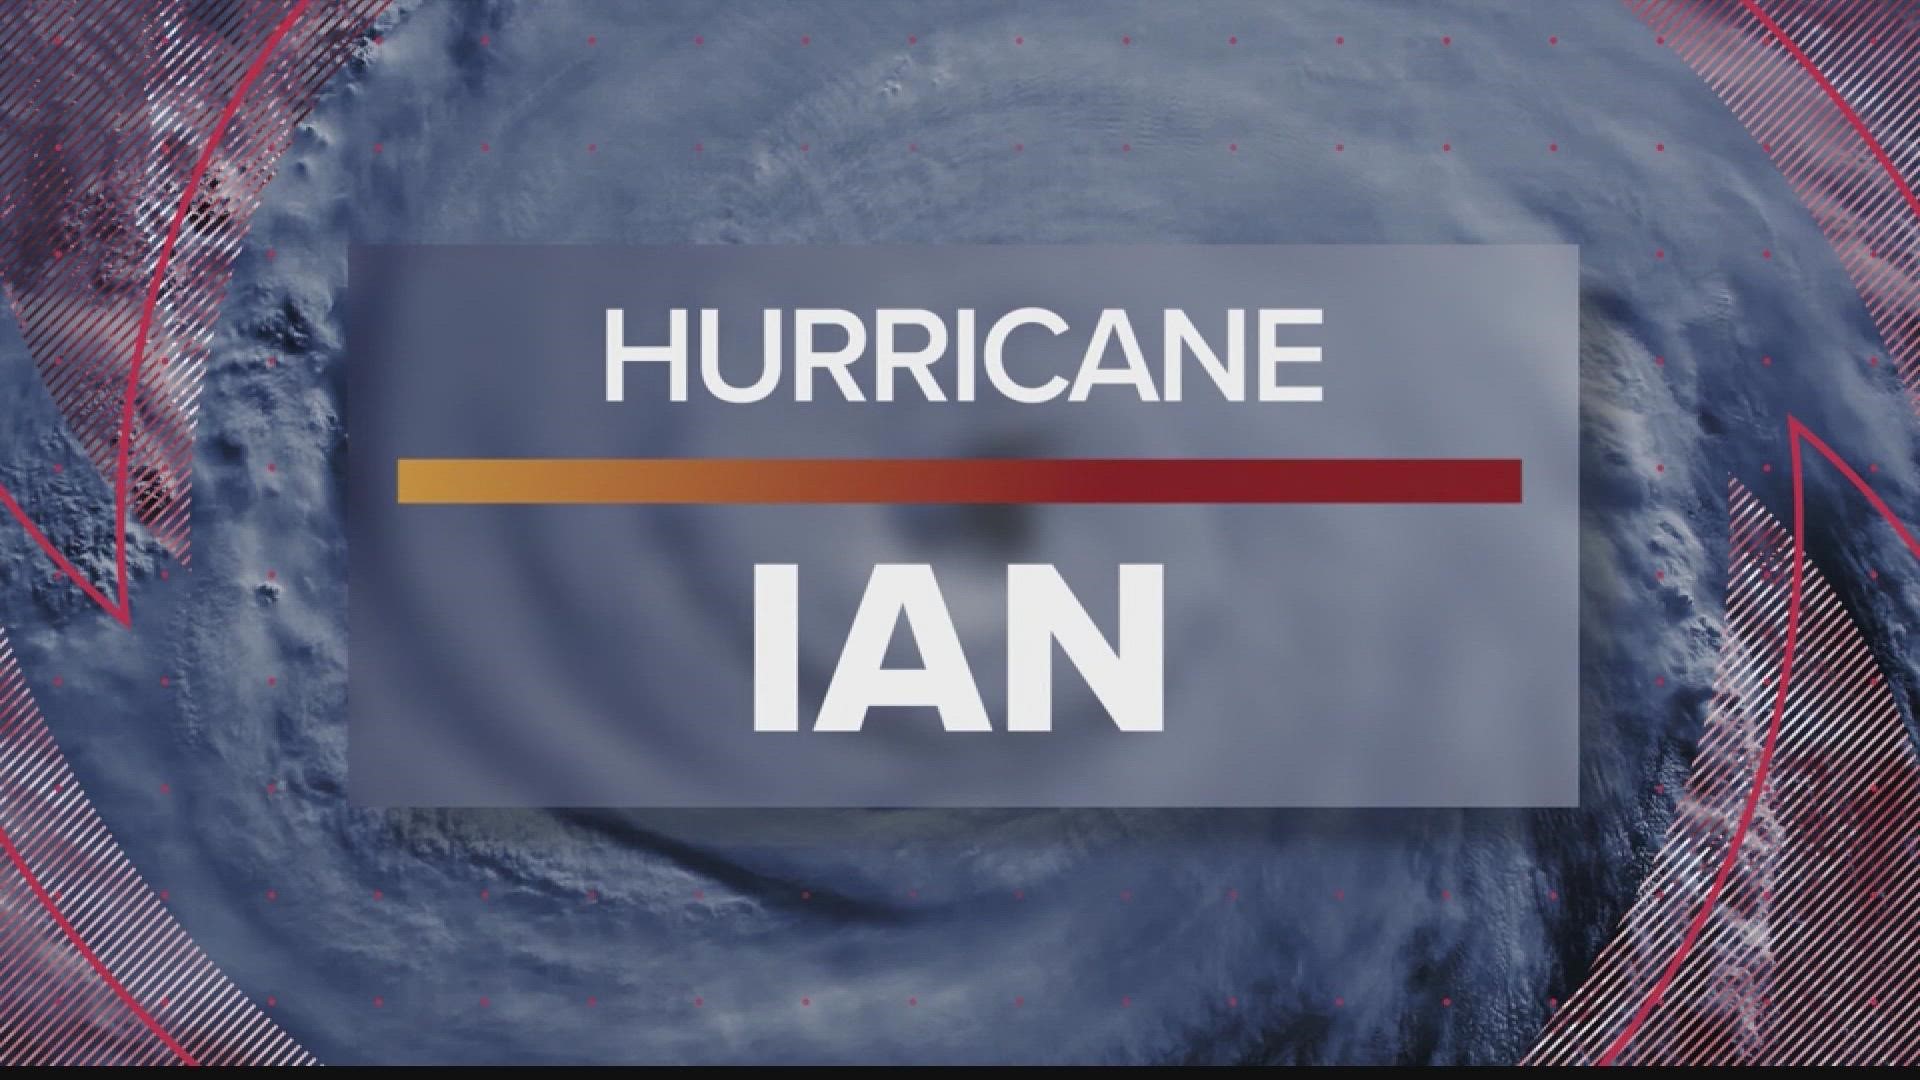 Ian is expected to intensify to category 4 status in the Gulf of Mexico before beginning to weaken as it comes ashore in Florida.